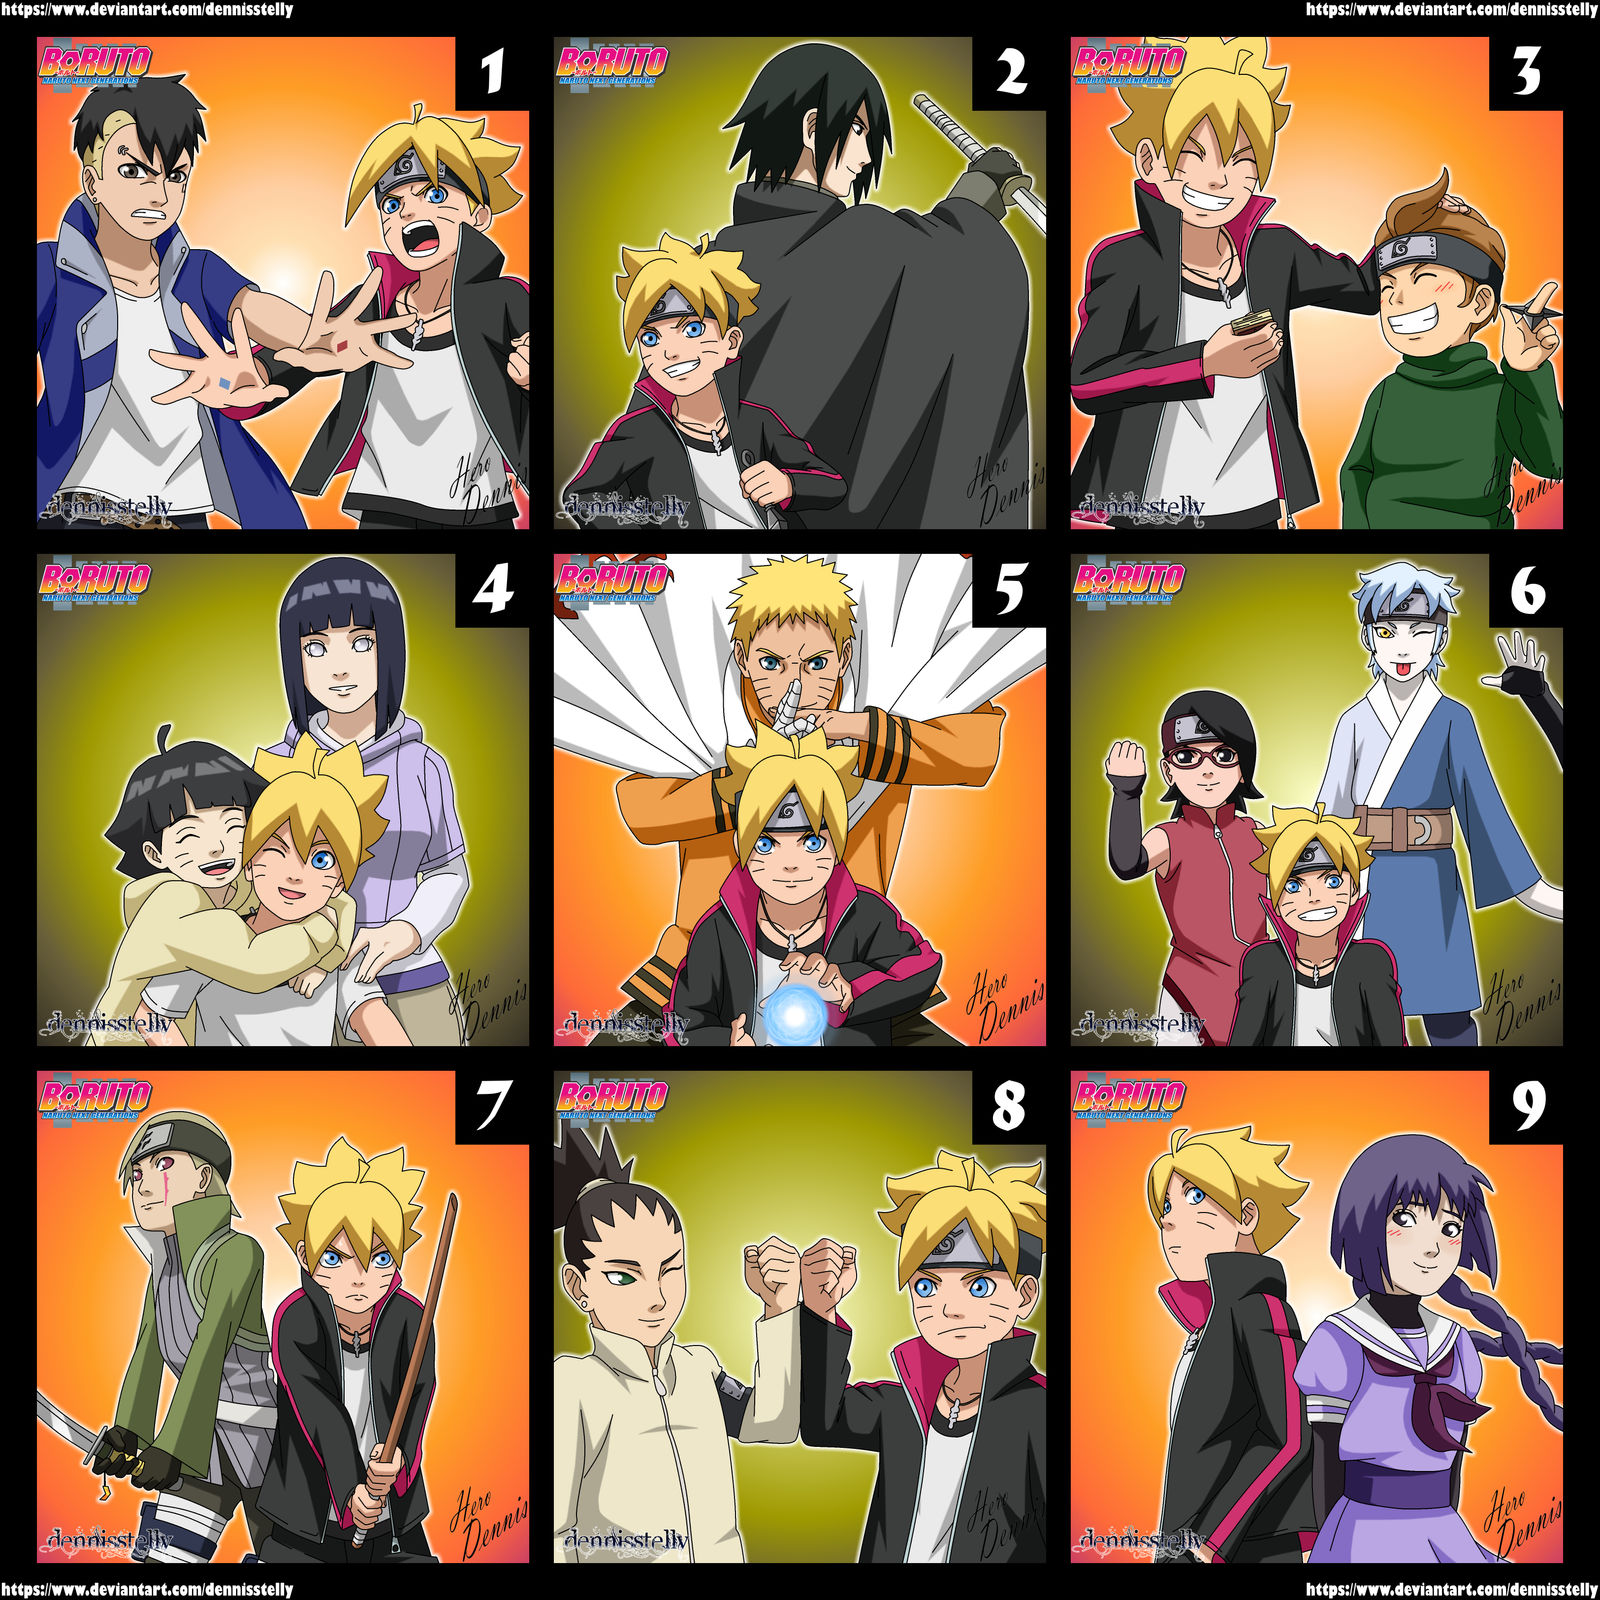 Boruto's card games - Which is better? by DennisStelly on DeviantArt